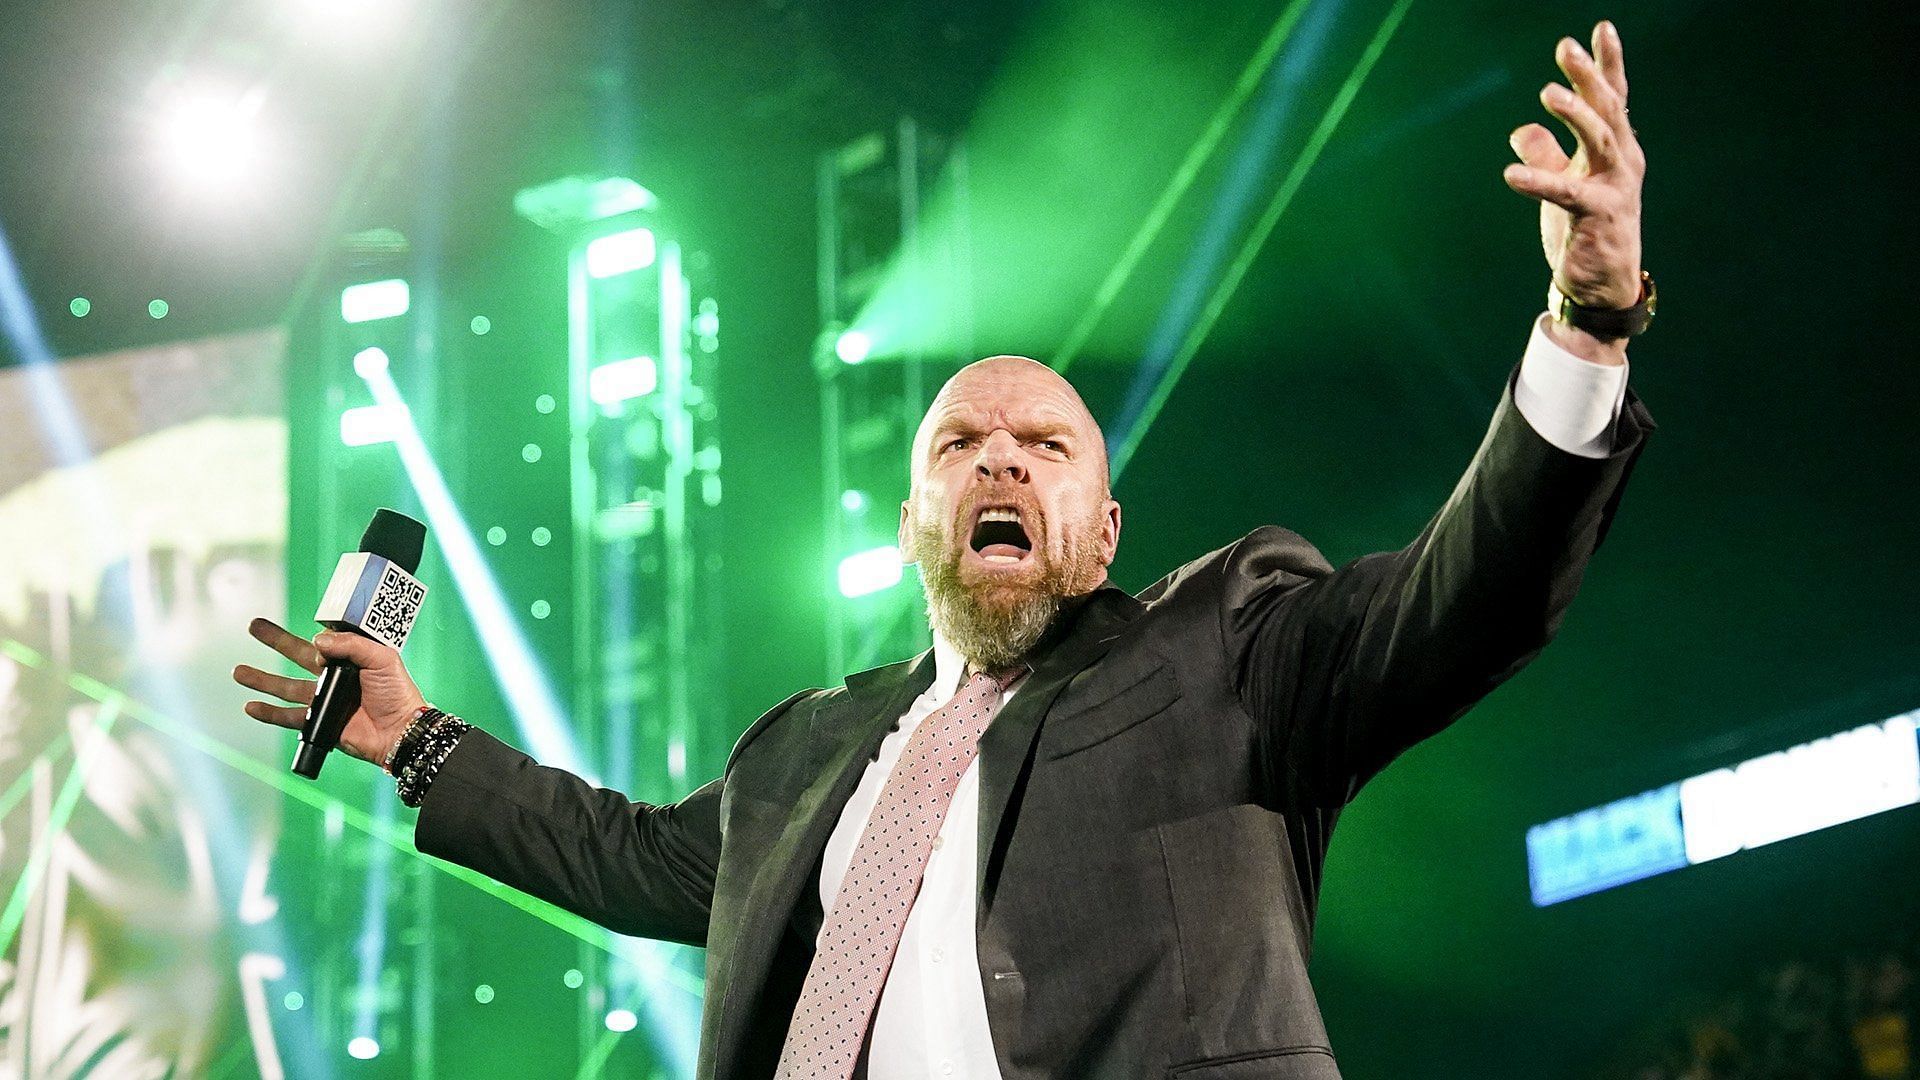 Triple H has changed the game